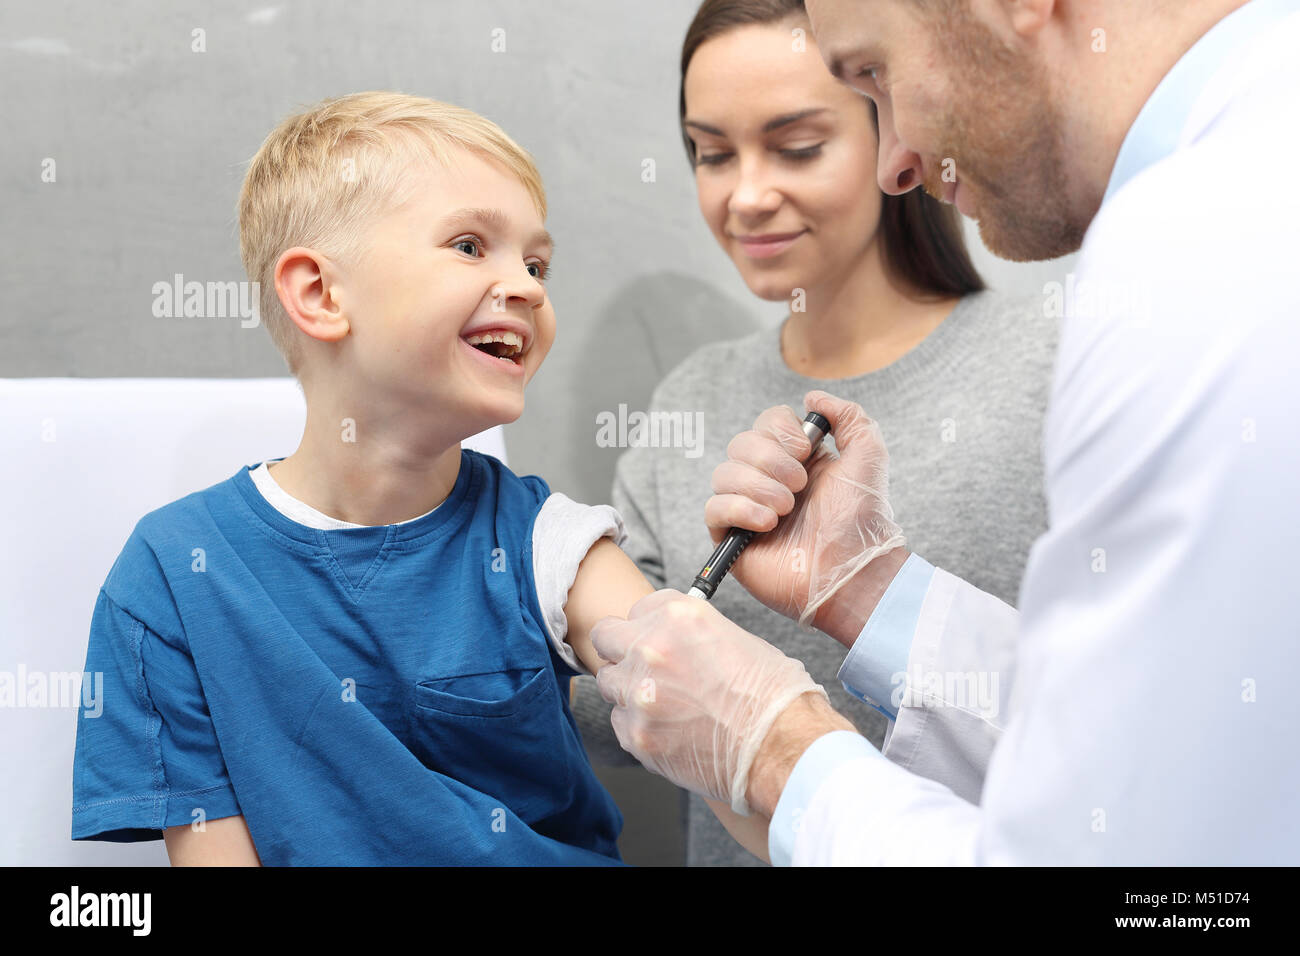 Injection with insulin. A child with diabetes when injecting insulin Stock Photo